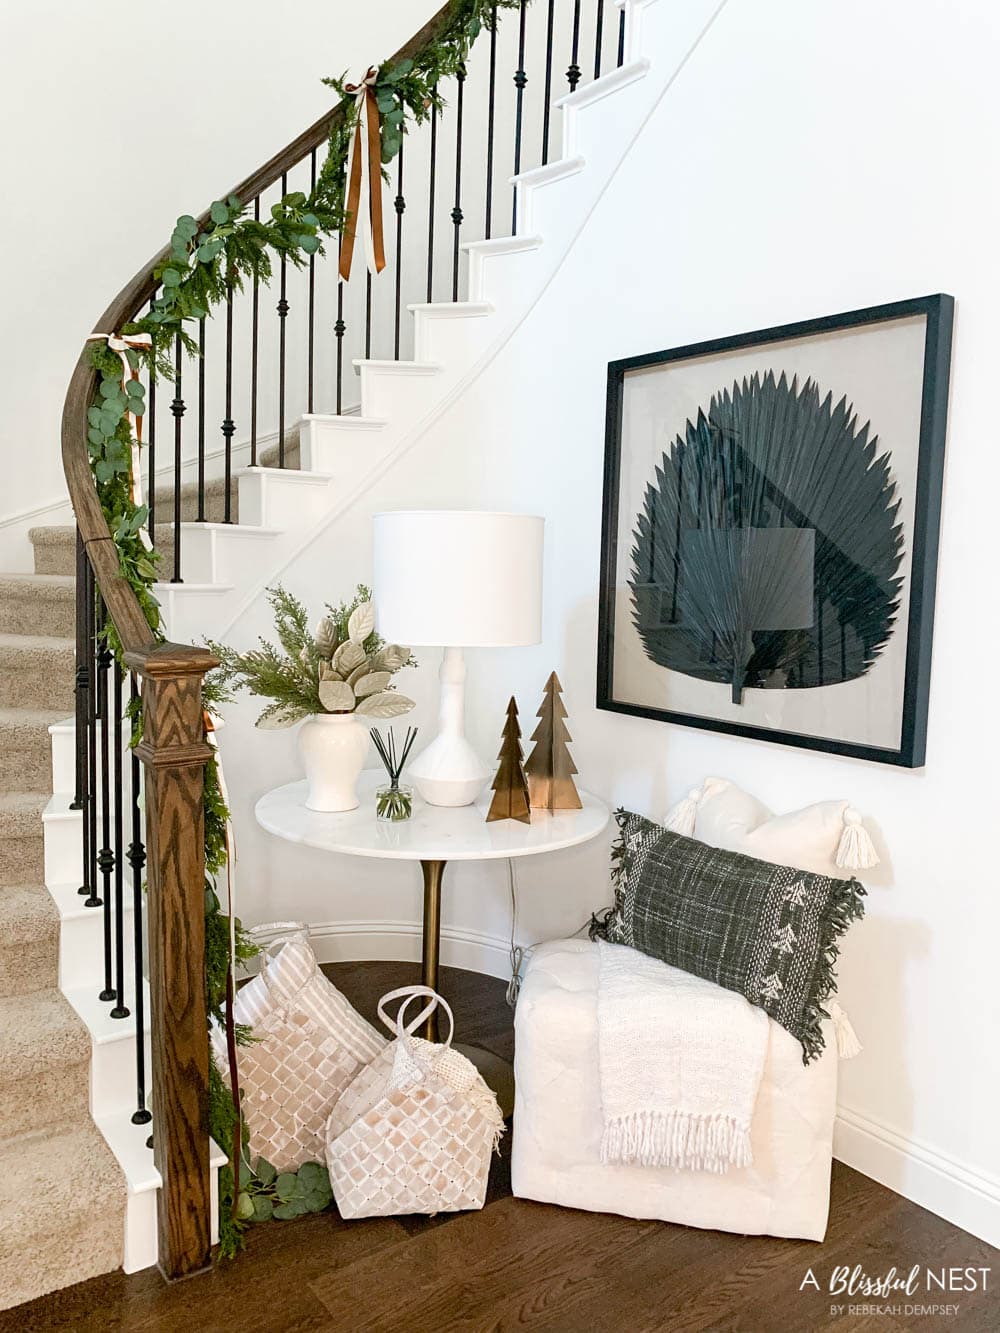 Christmas decor with pillows, baskets, metal trees, and garland on the stairway.